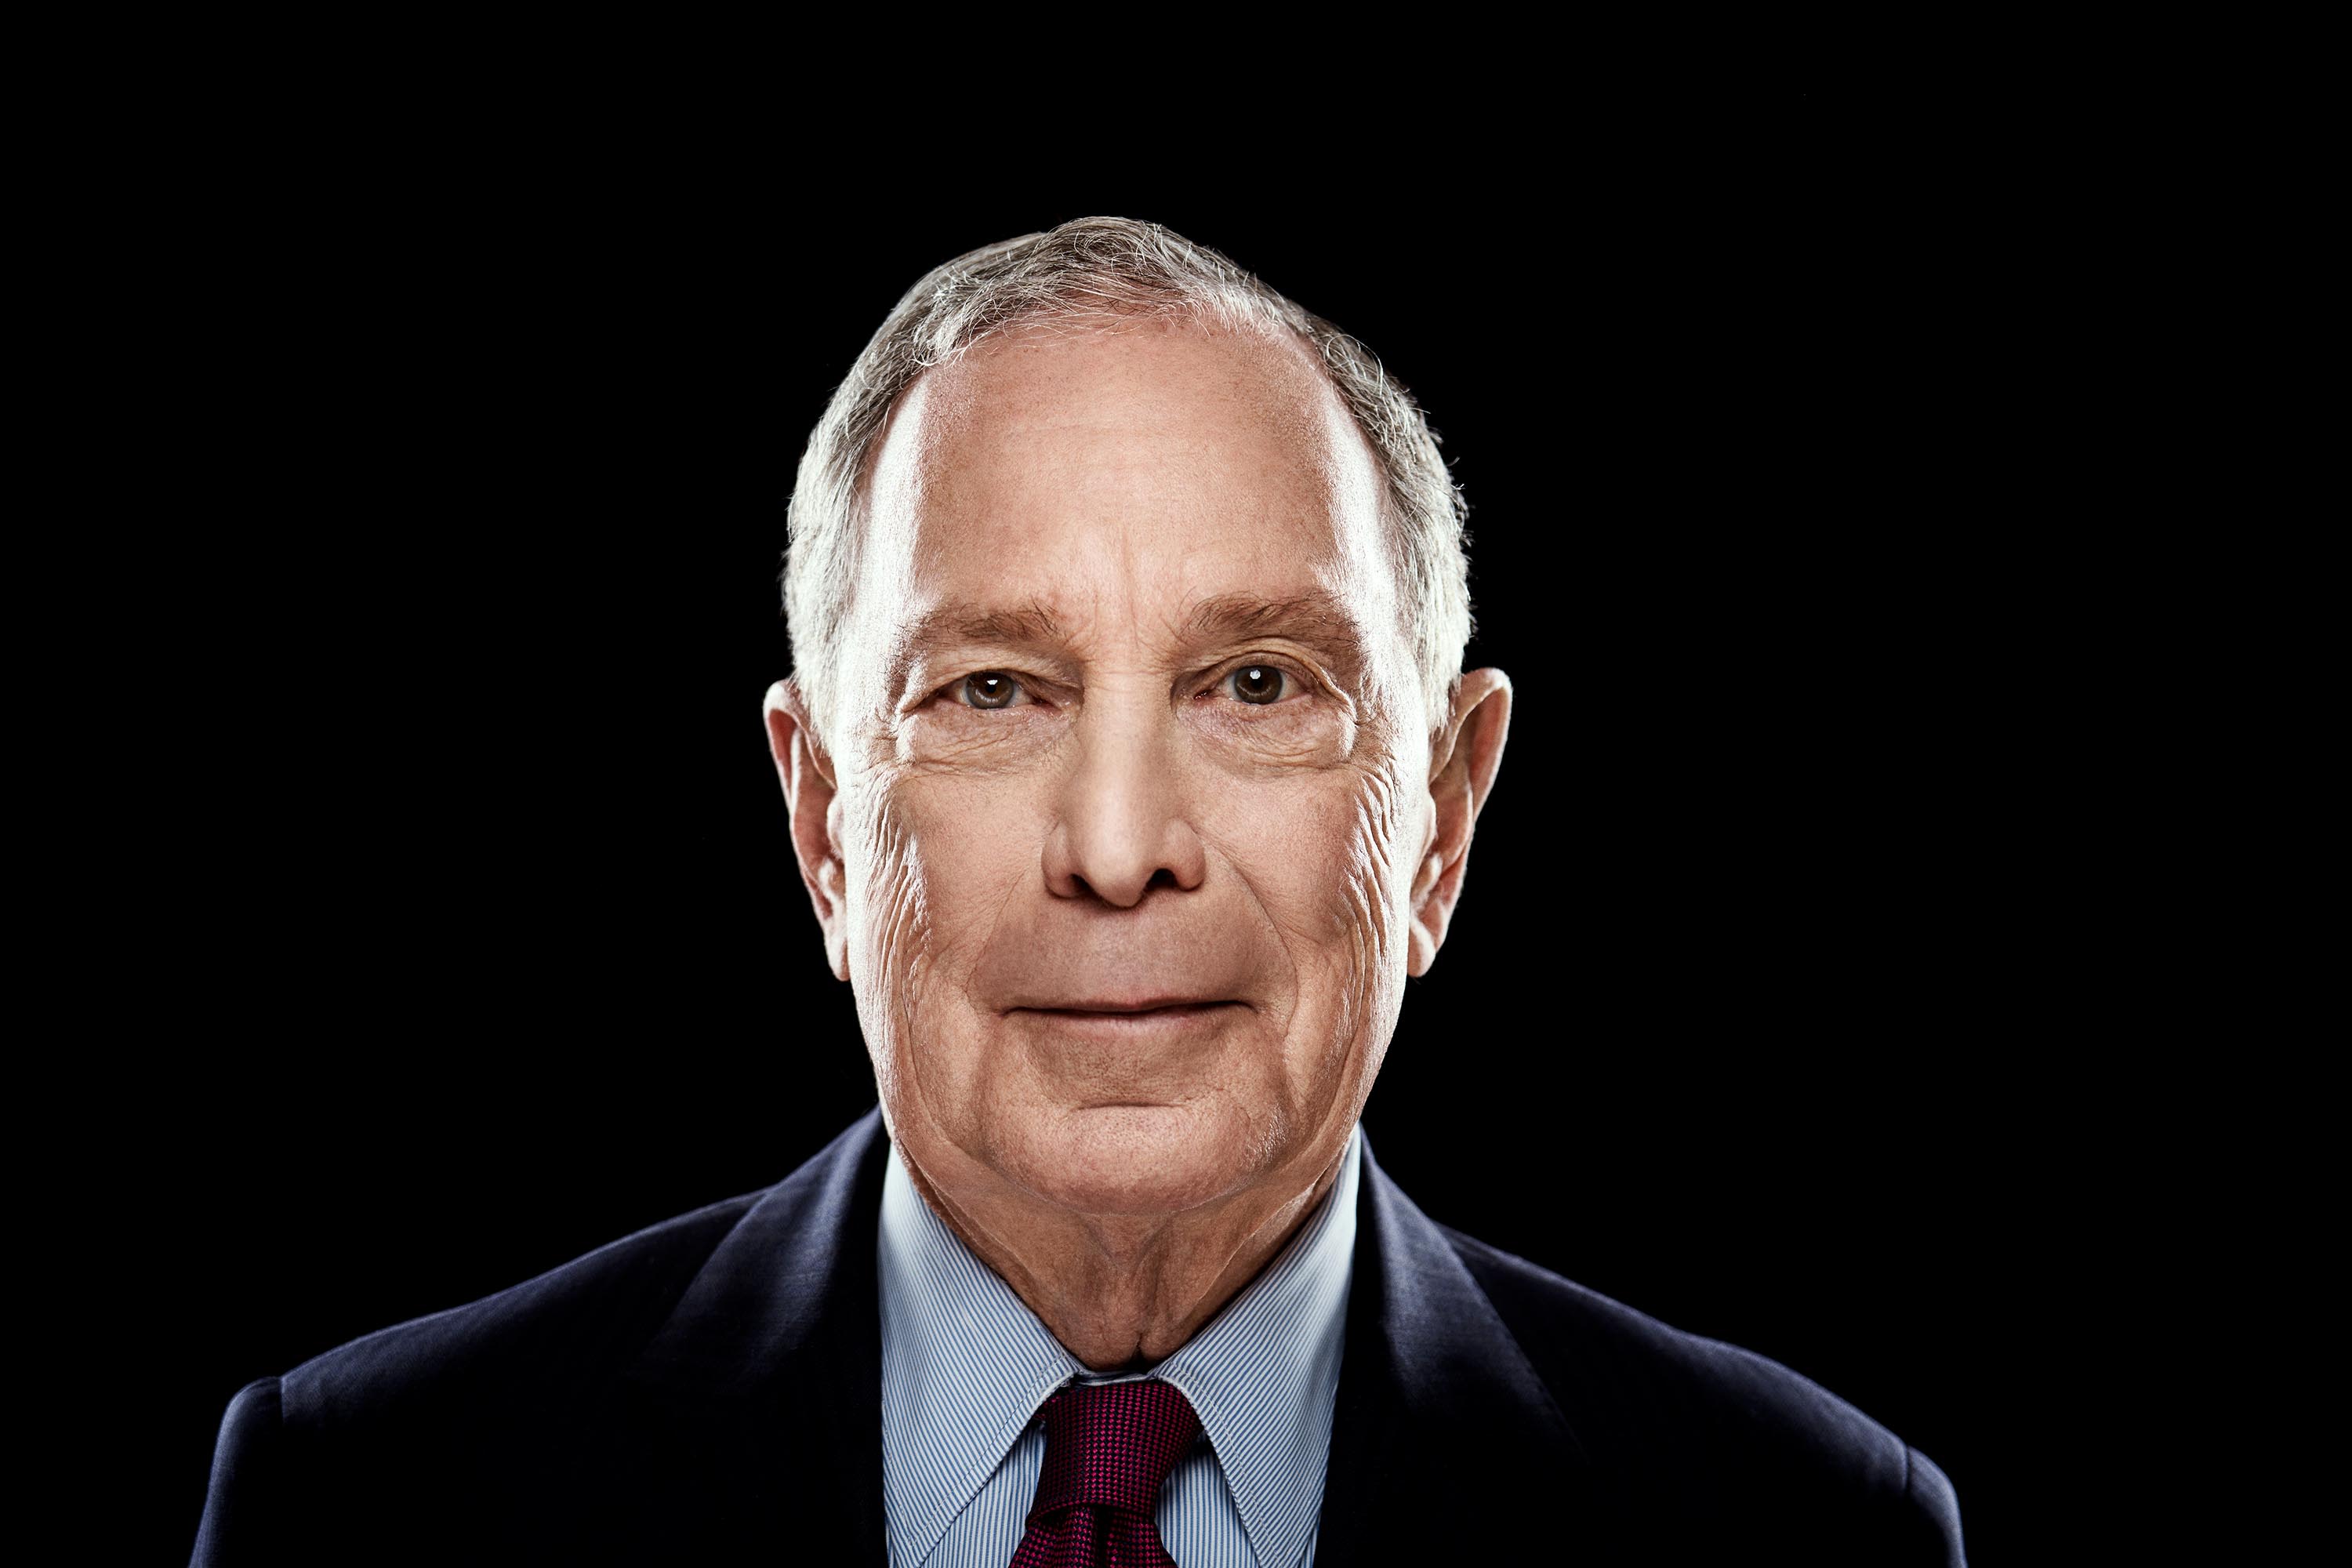 20-facts-about-michael-bloomberg